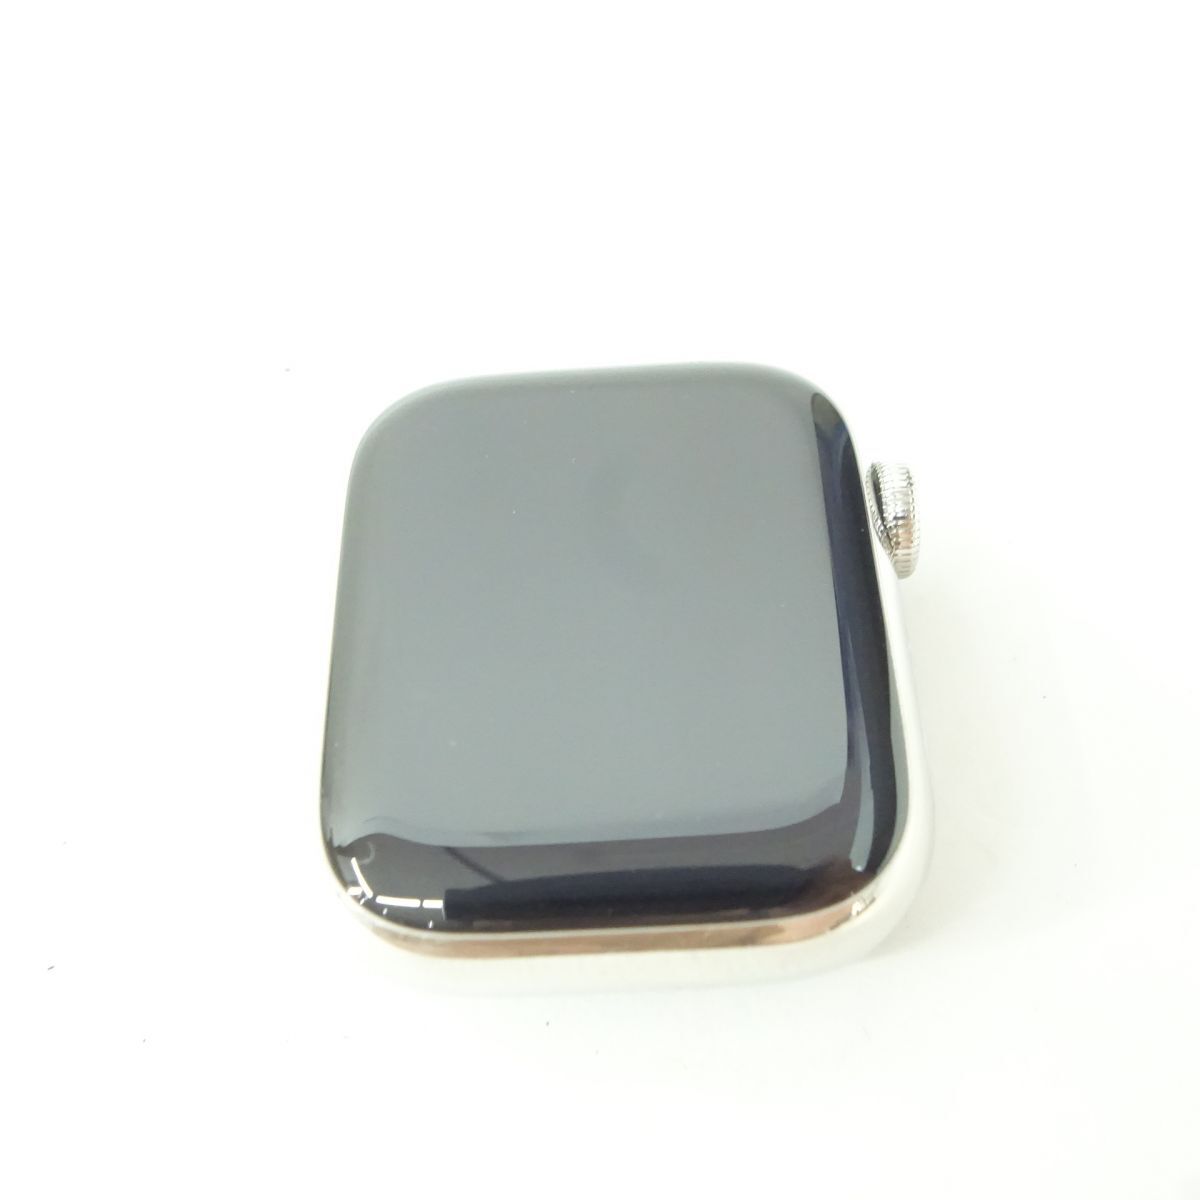 115s Apple Watch Series 7 41mm GPS Cellular model MKLU3J/A battery most high capacity 83% * used 